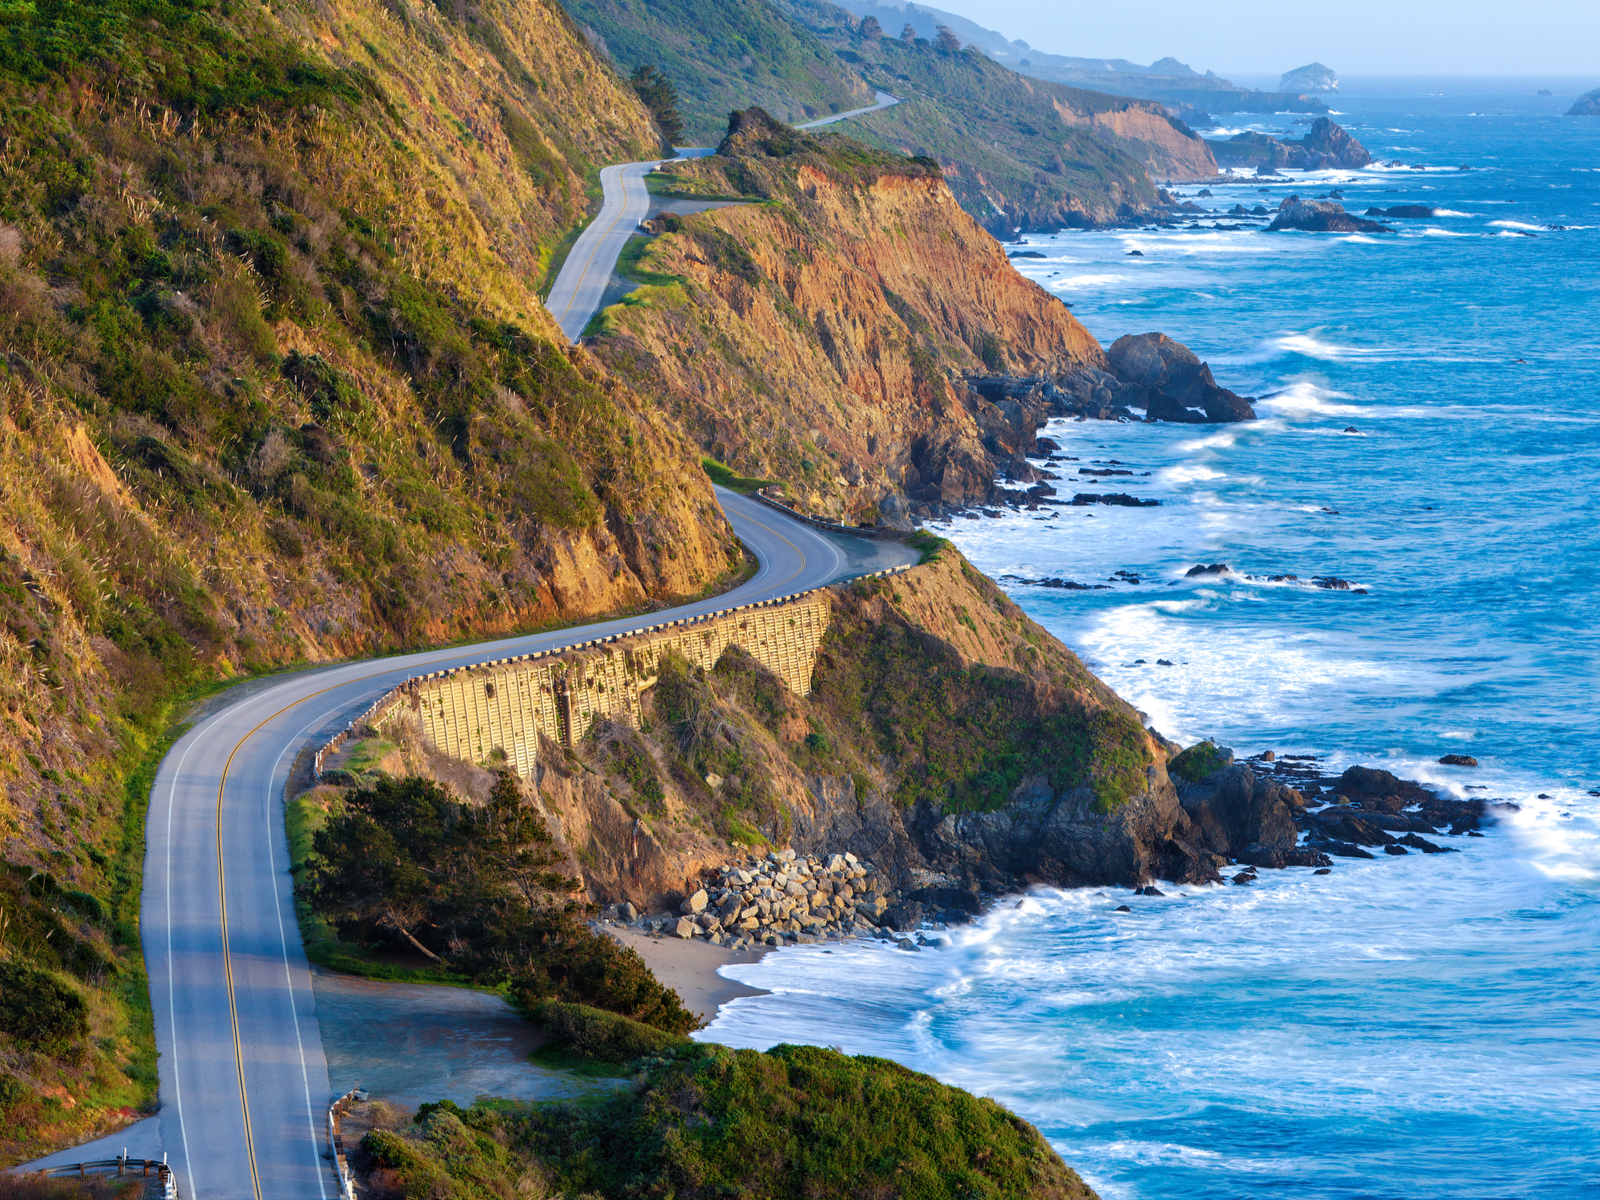 Highway 1 running up the pacific coast in the Big Sur